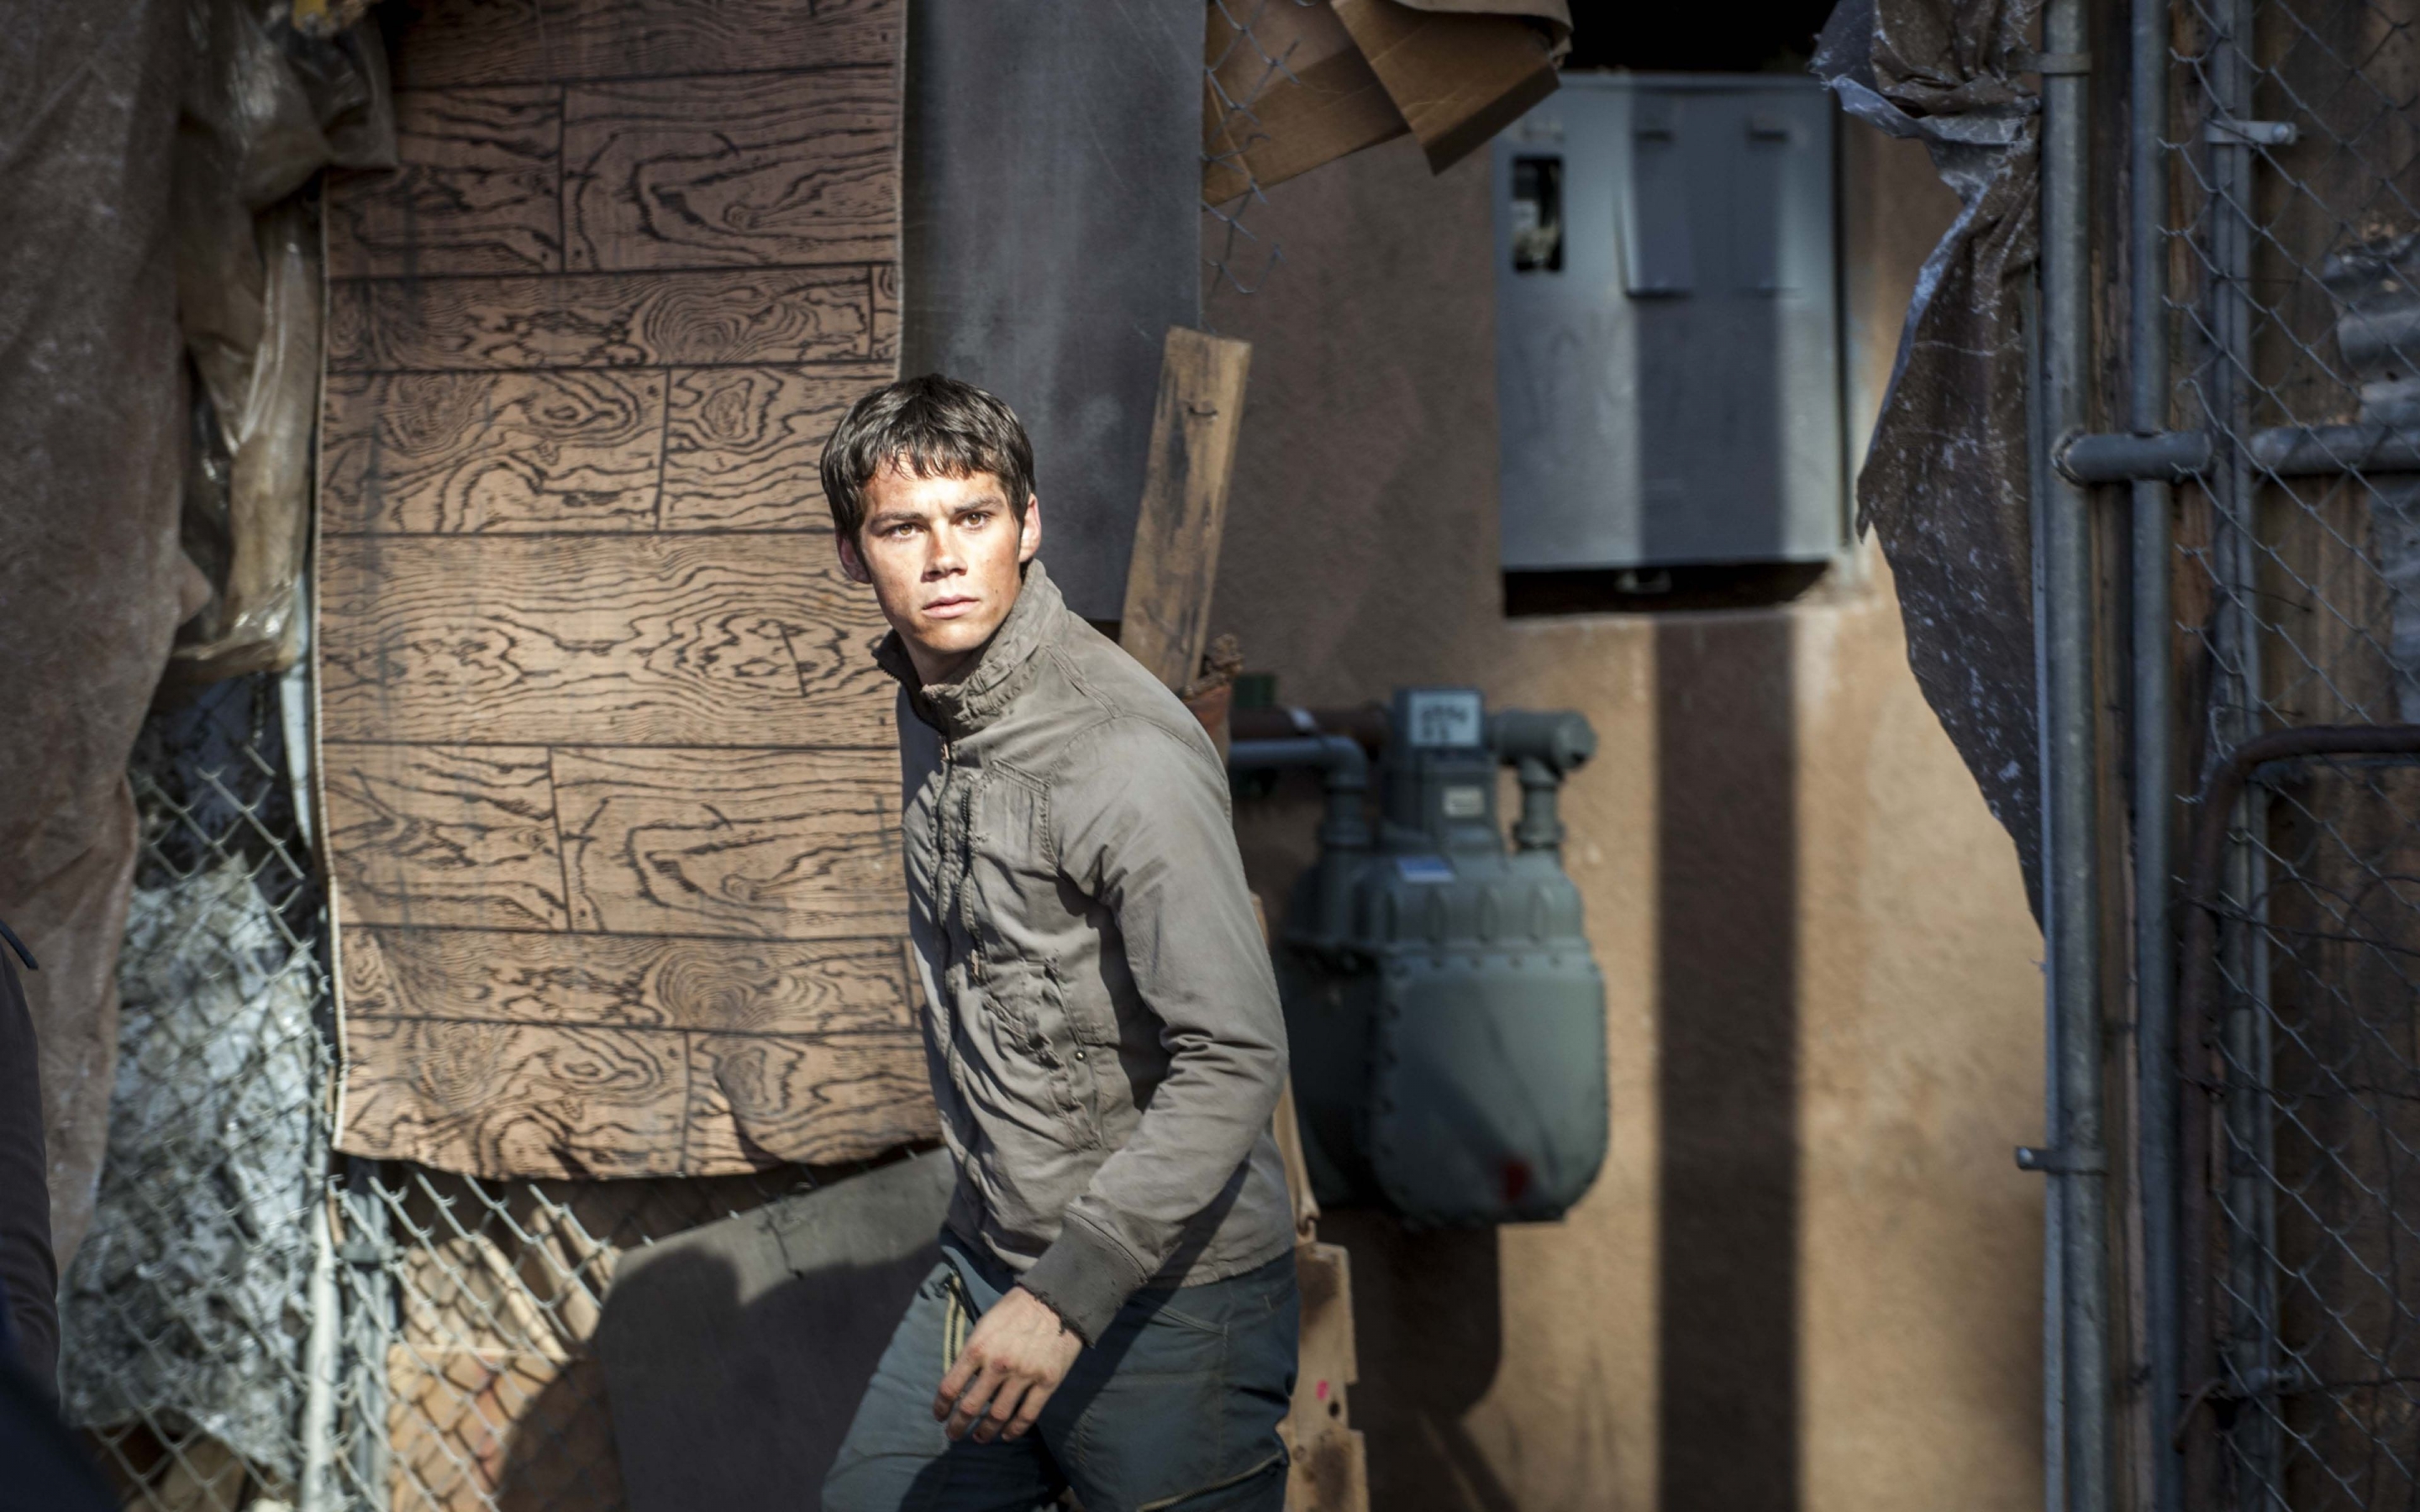 Maze Runner The Scorch Trials: Thomas for 2880 x 1800 Retina Display resolution